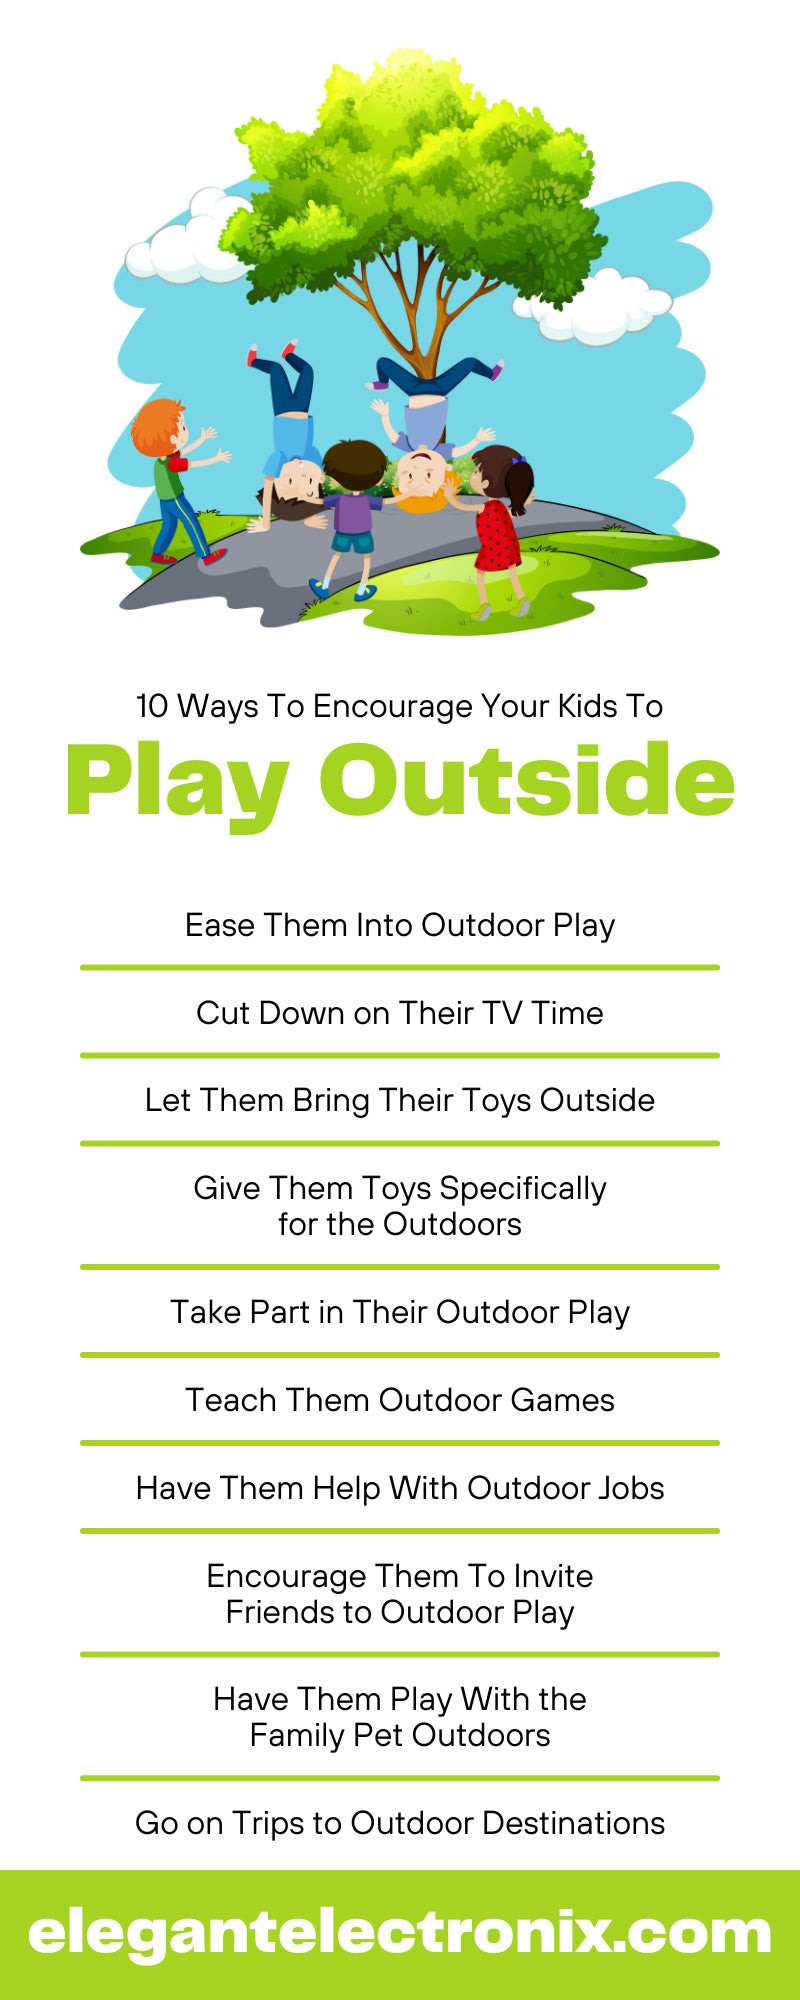 10 Ways To Encourage Your Kids To Play Outside